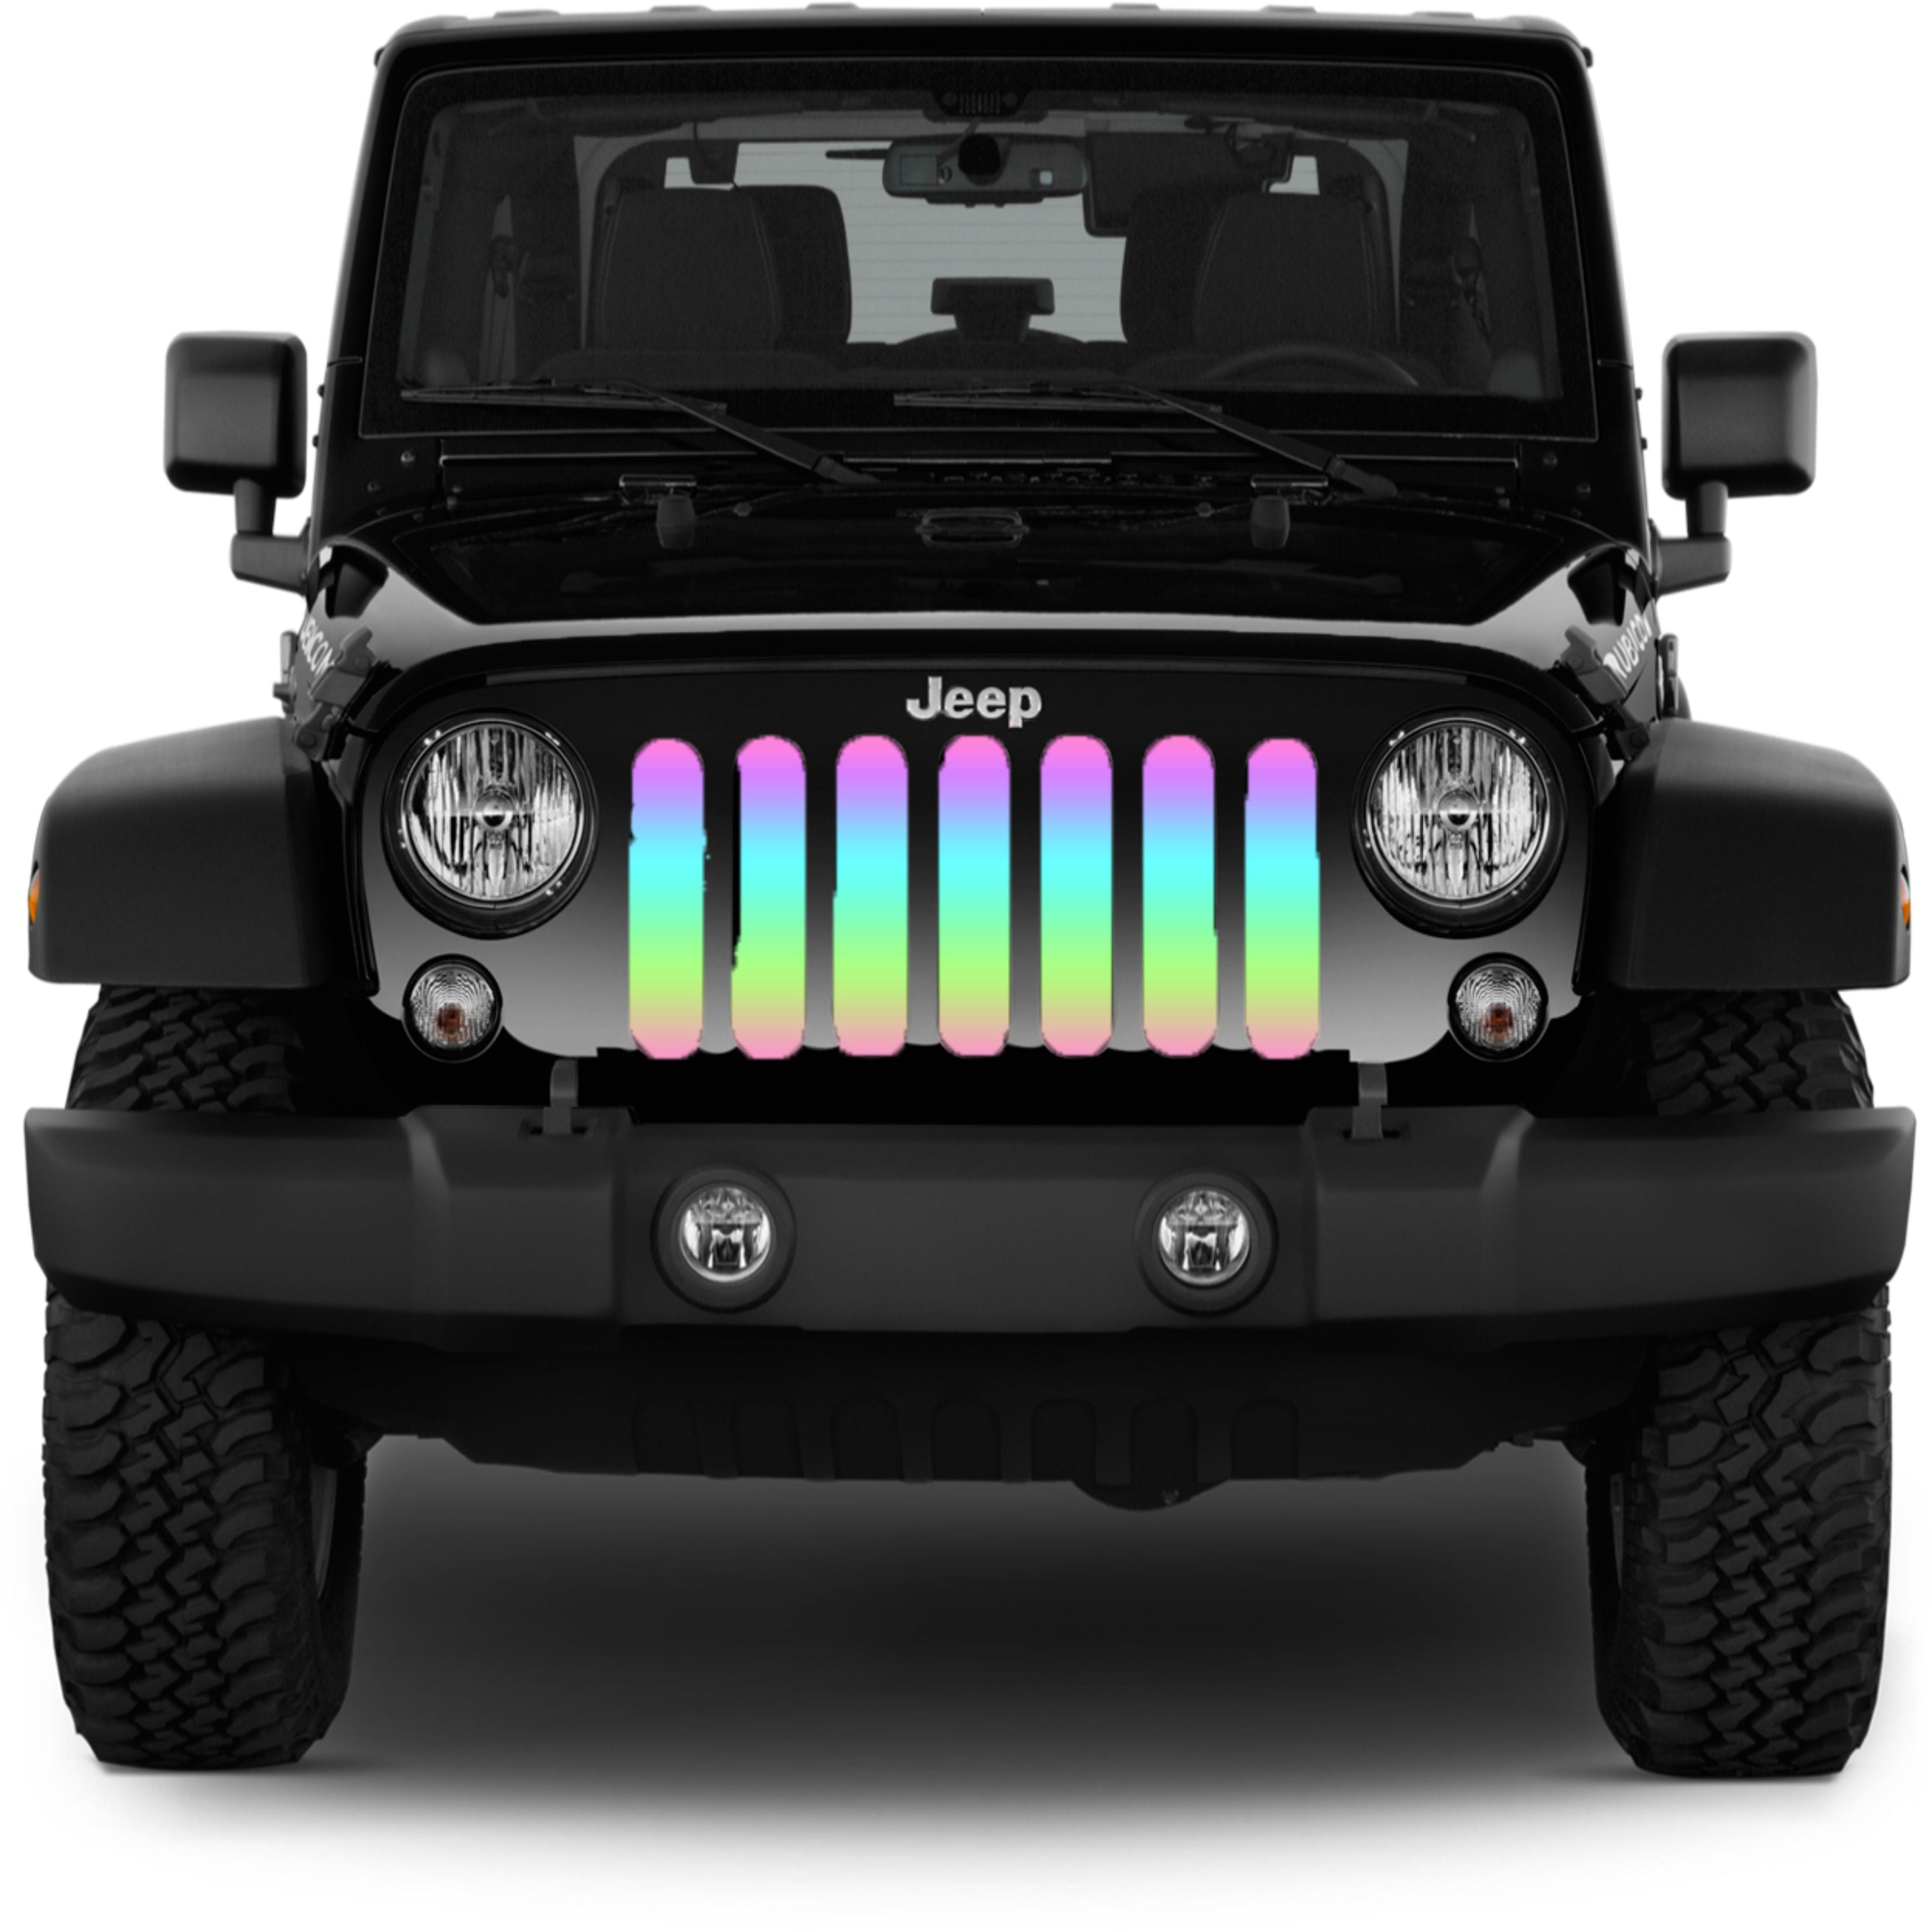 Bring a fun beautiful bright energy to the road with this pastel ombre rainbow multicolored grille insert for your Jeep. 